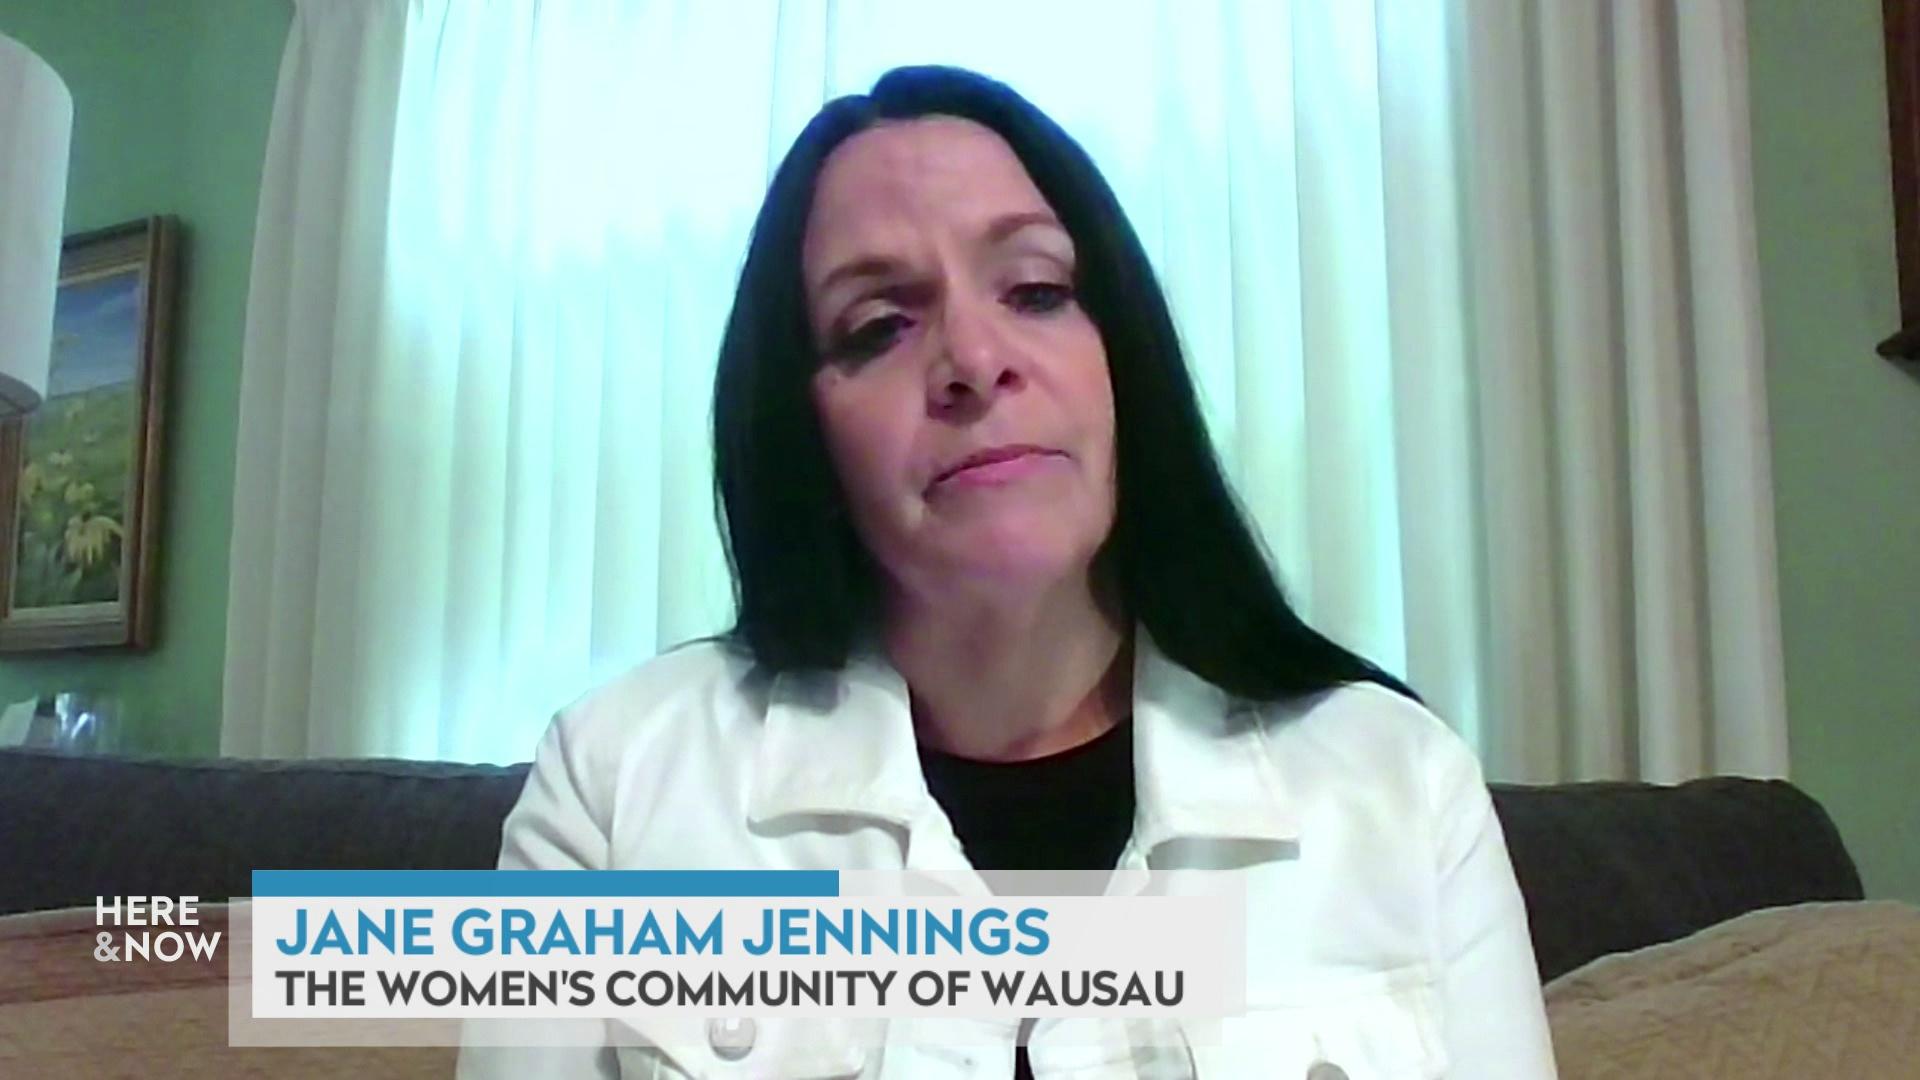 A still image from a video shows Jane Graham Jennings seated in front of a drawn white curtains and a lamp to her left with a graphic at bottom reading 'Jane Graham Jennings' and 'The Women's Community of Wausau.'